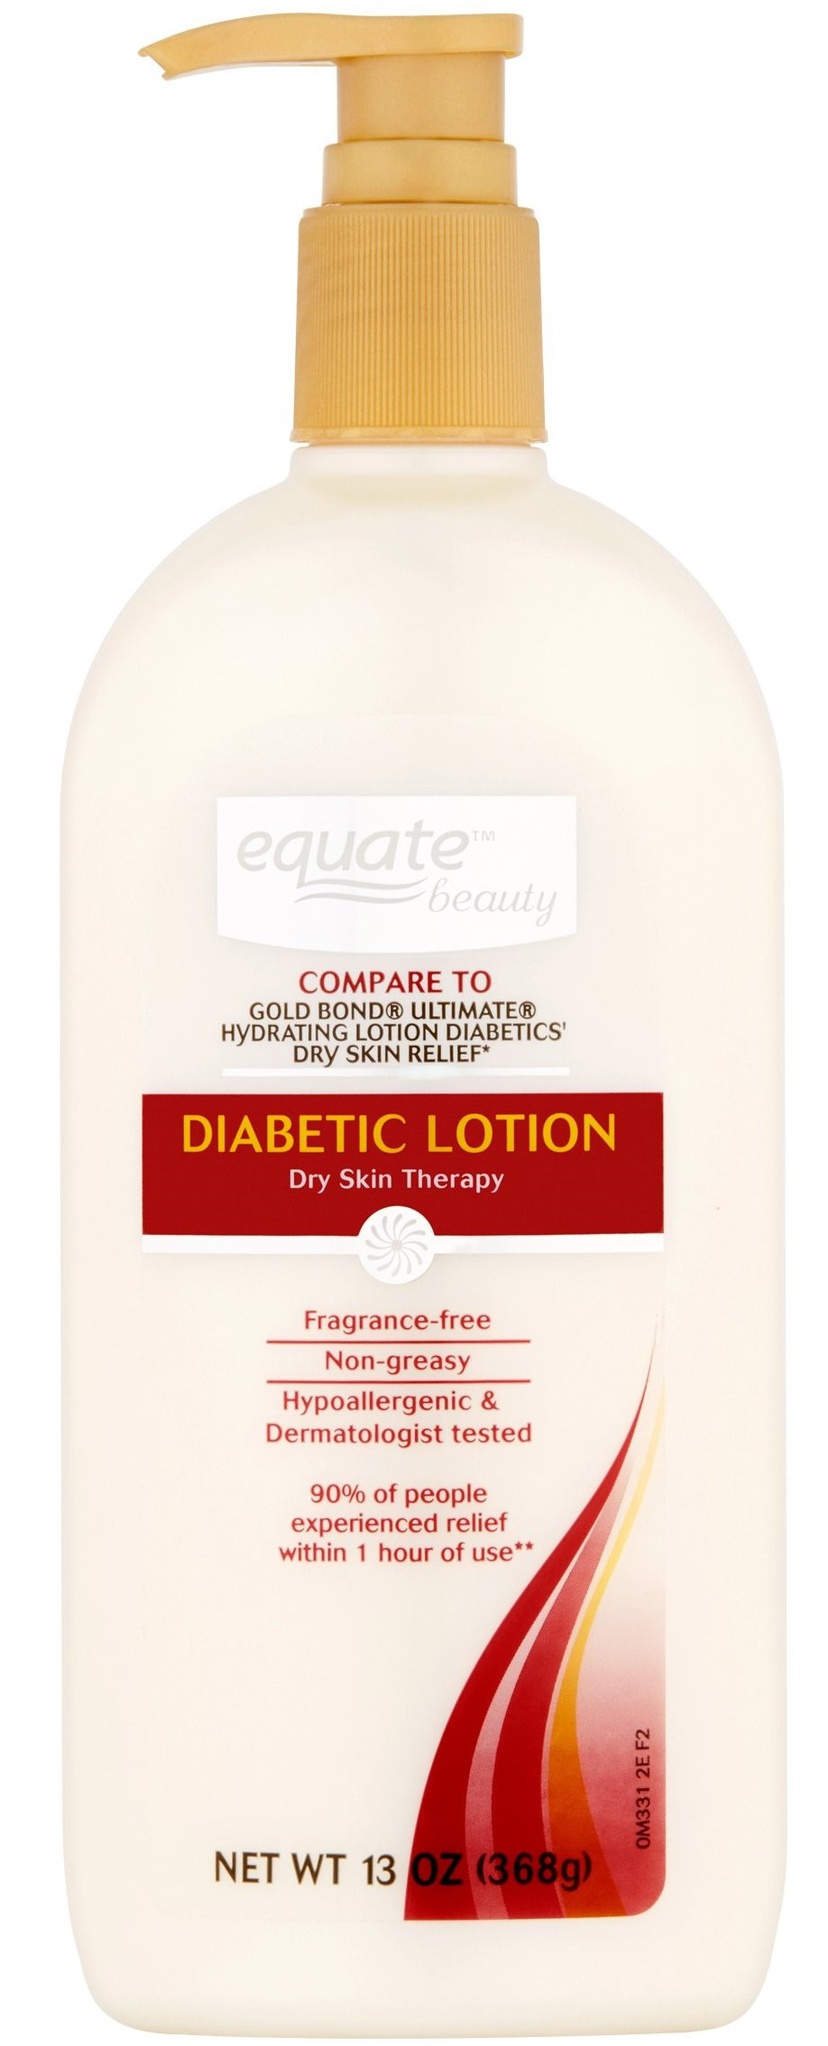 Equate Beauty Diabetic Lotion Dry Skin Therapy